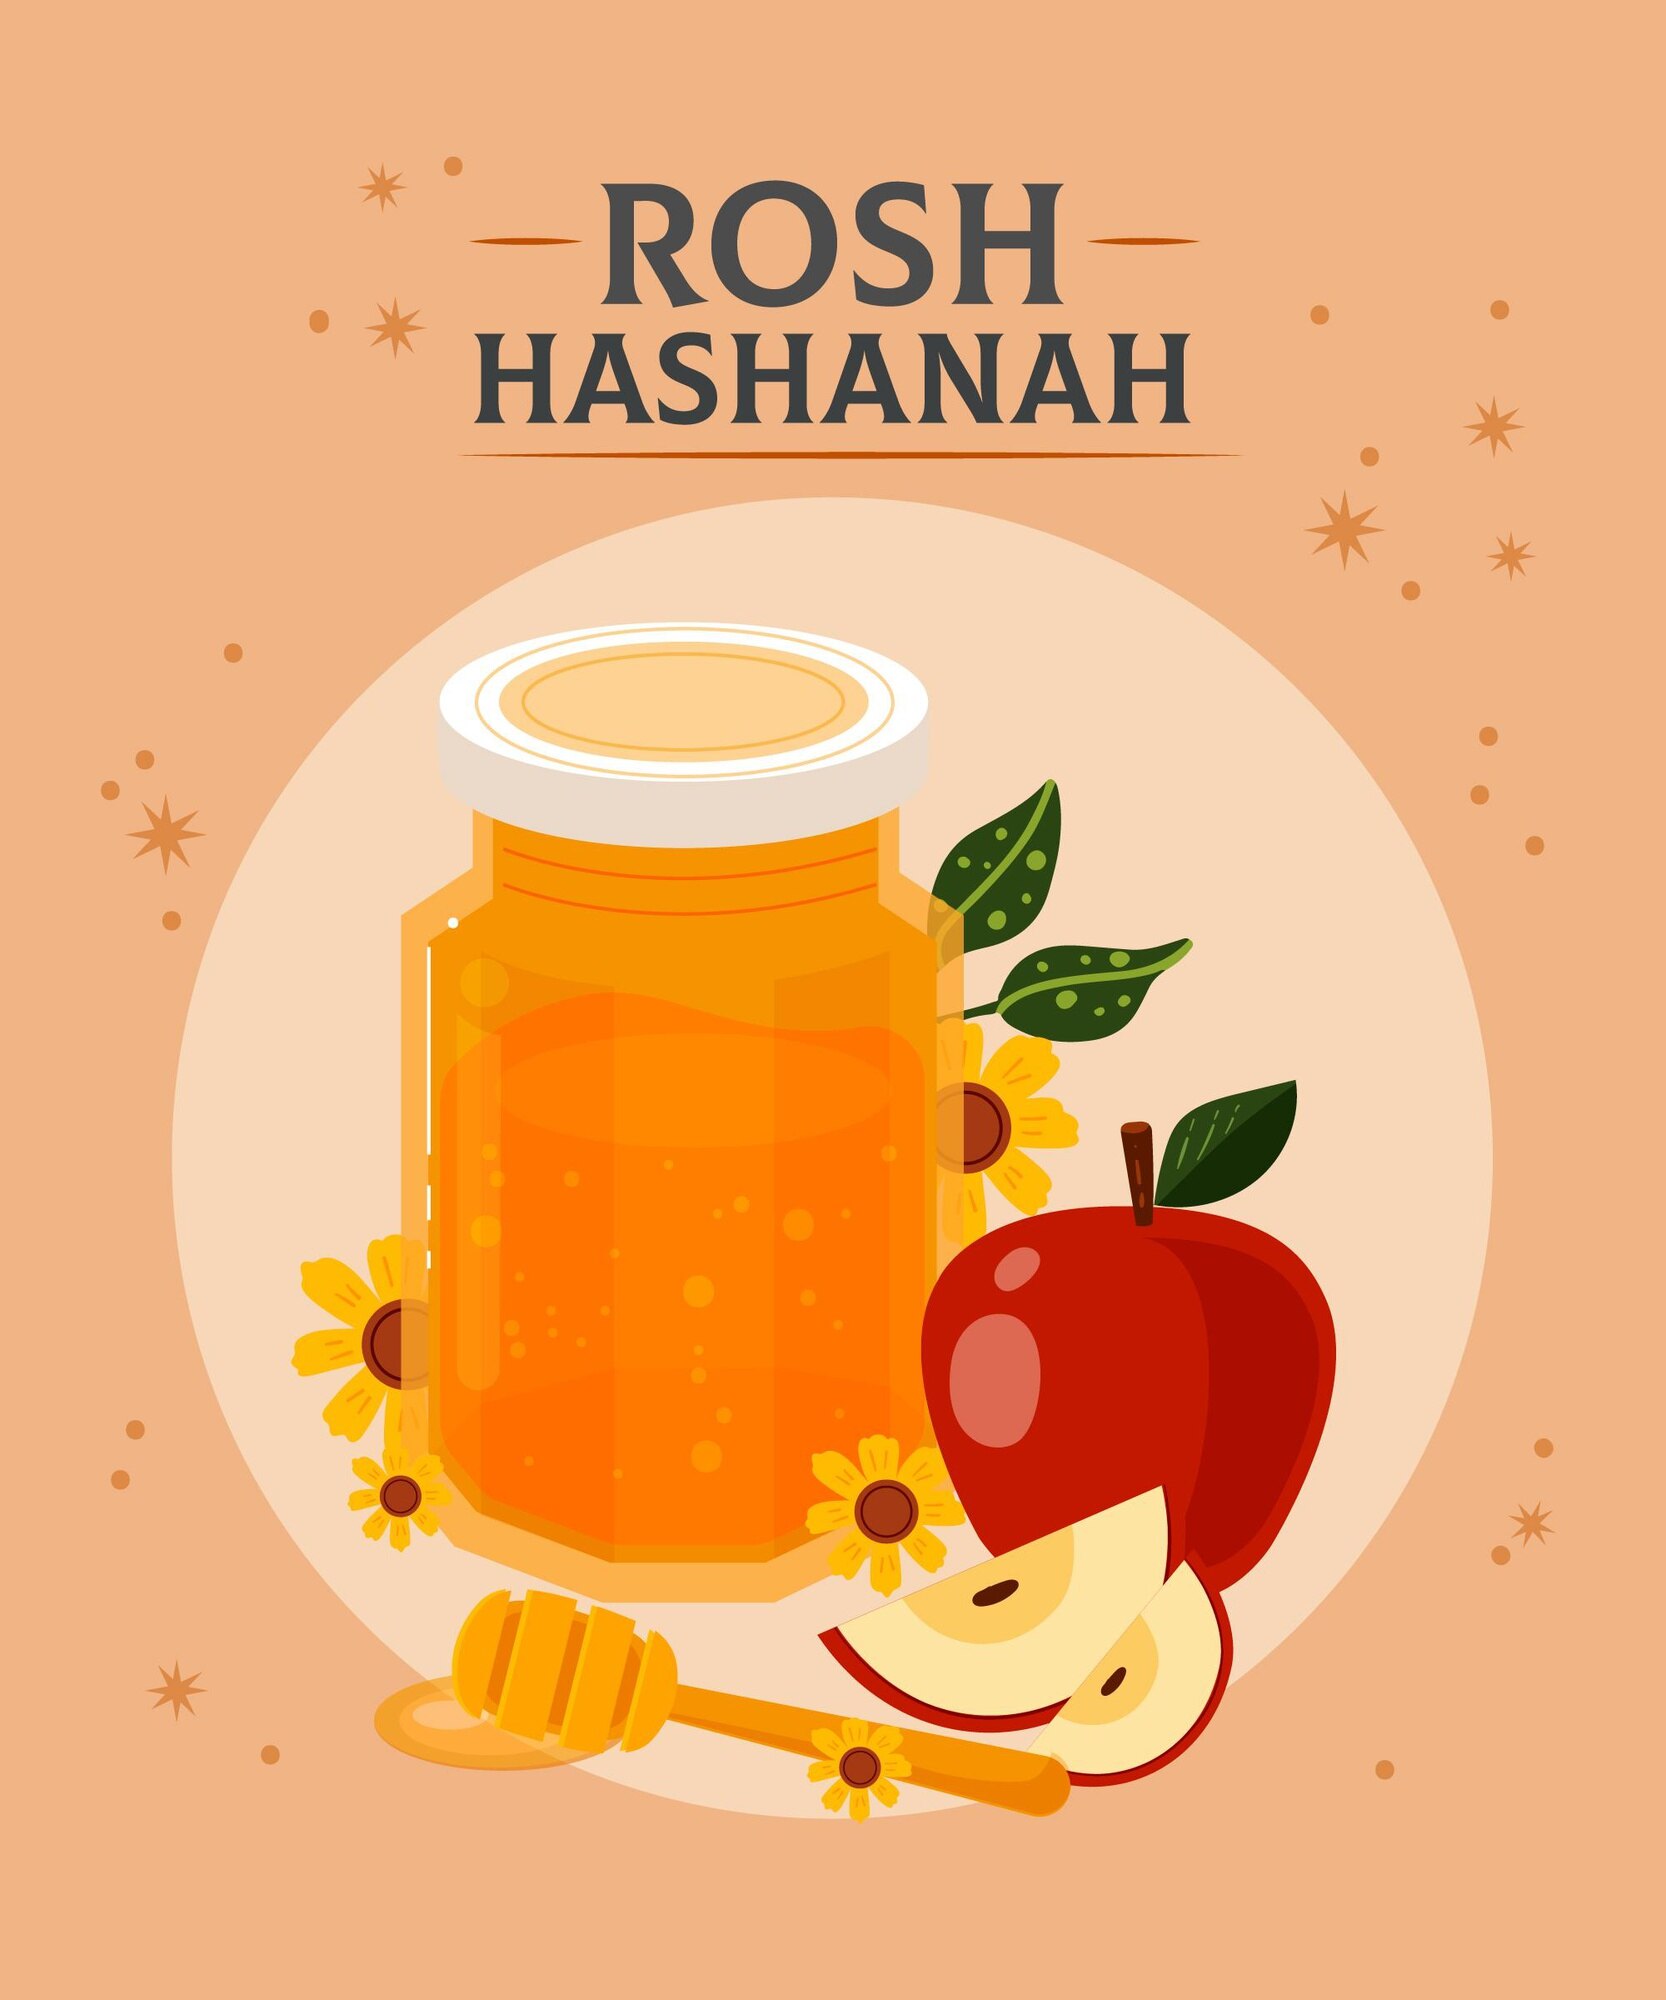 Rosh Hashanah 2022 Greetings, Wishes, Quotes, Images, Messages, Slogans